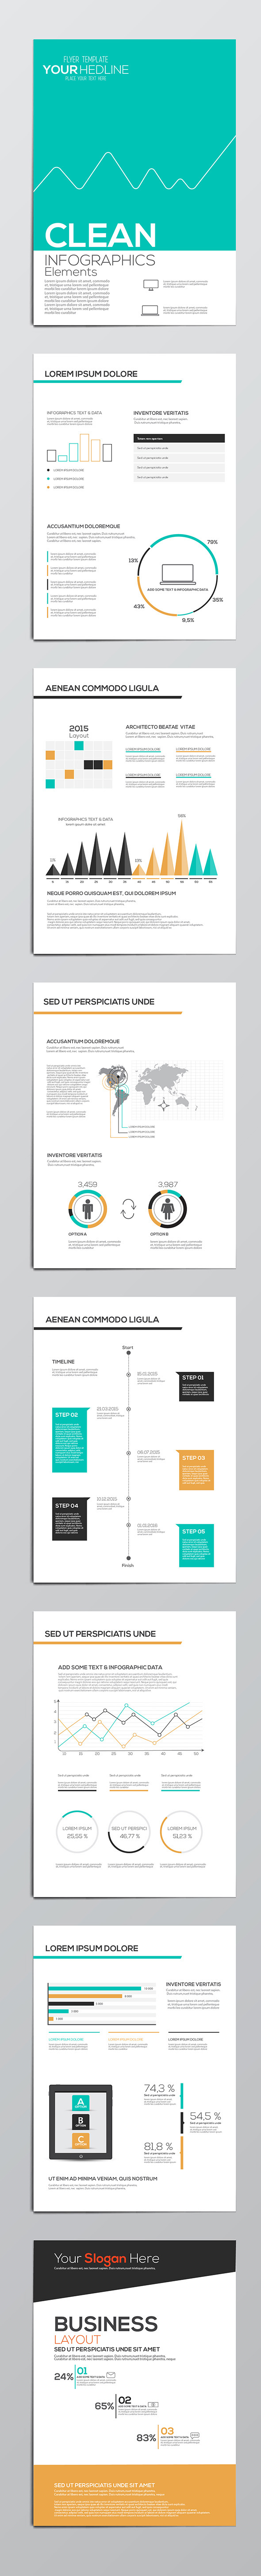 infographic business template brochure timeline report icons Promotion design tools modern info graphic